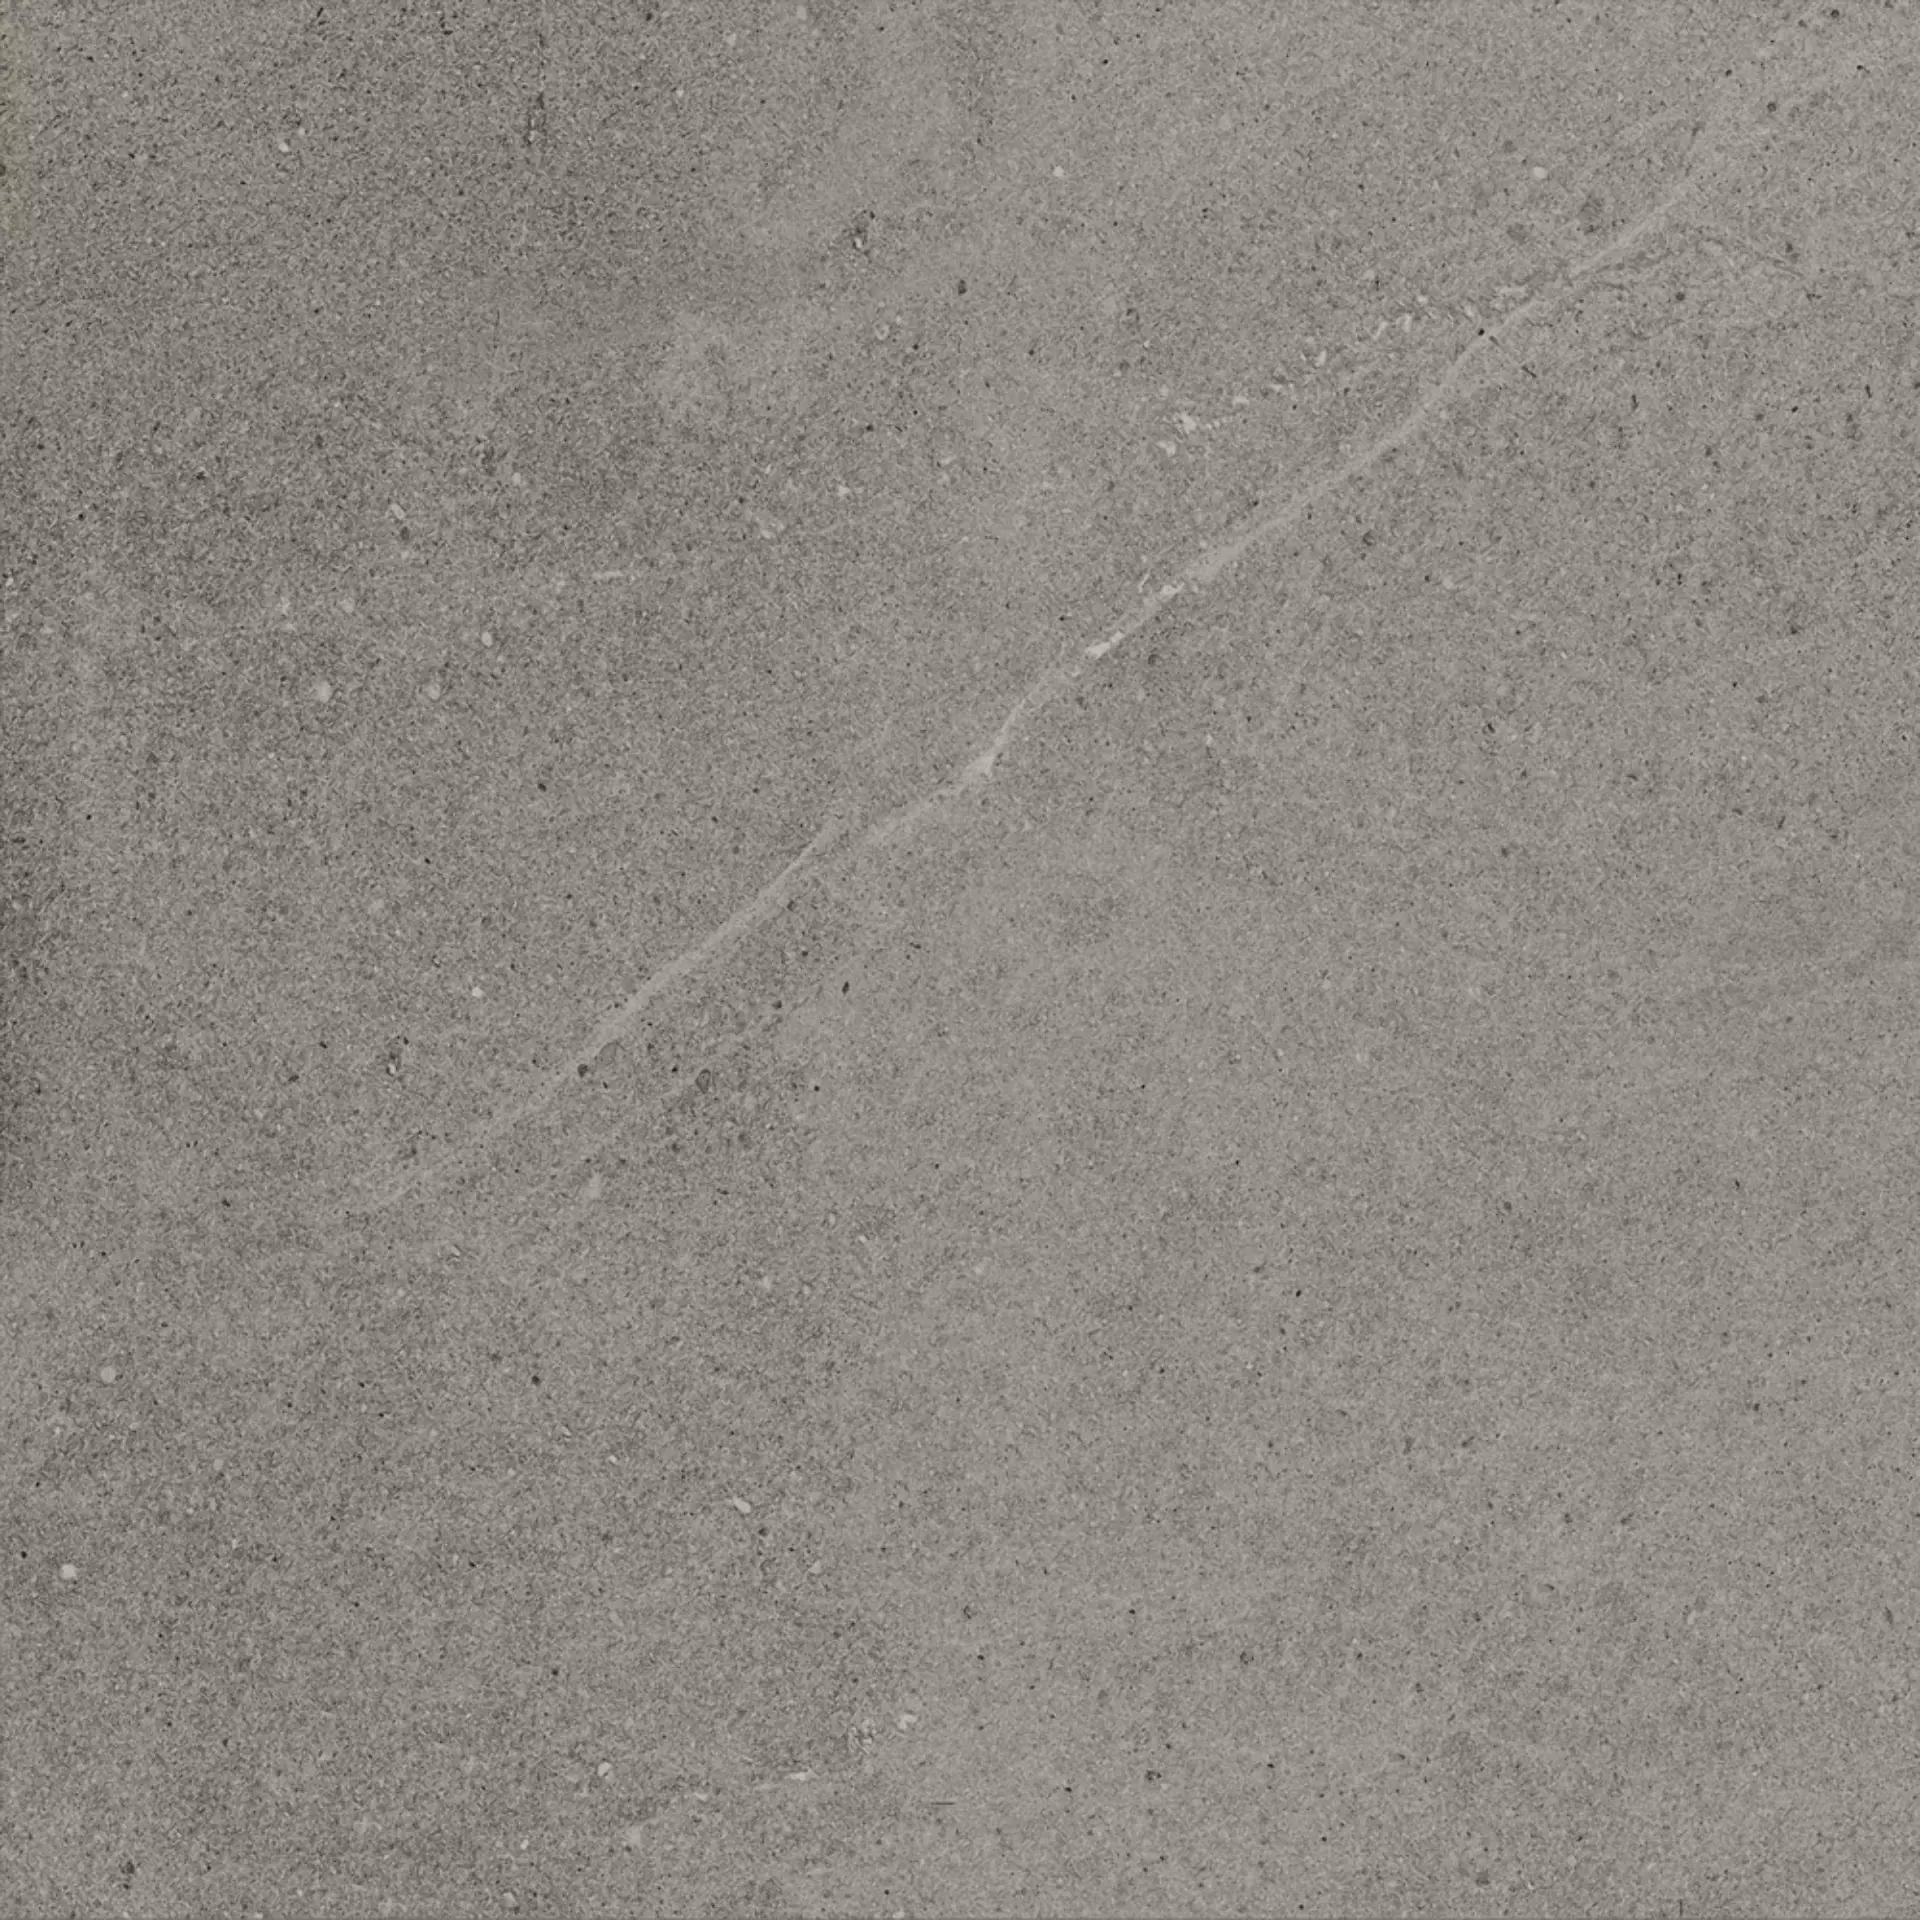 Cottodeste Limestone Slate Naturale Protect EGWLS31 60x60cm rectified 14mm